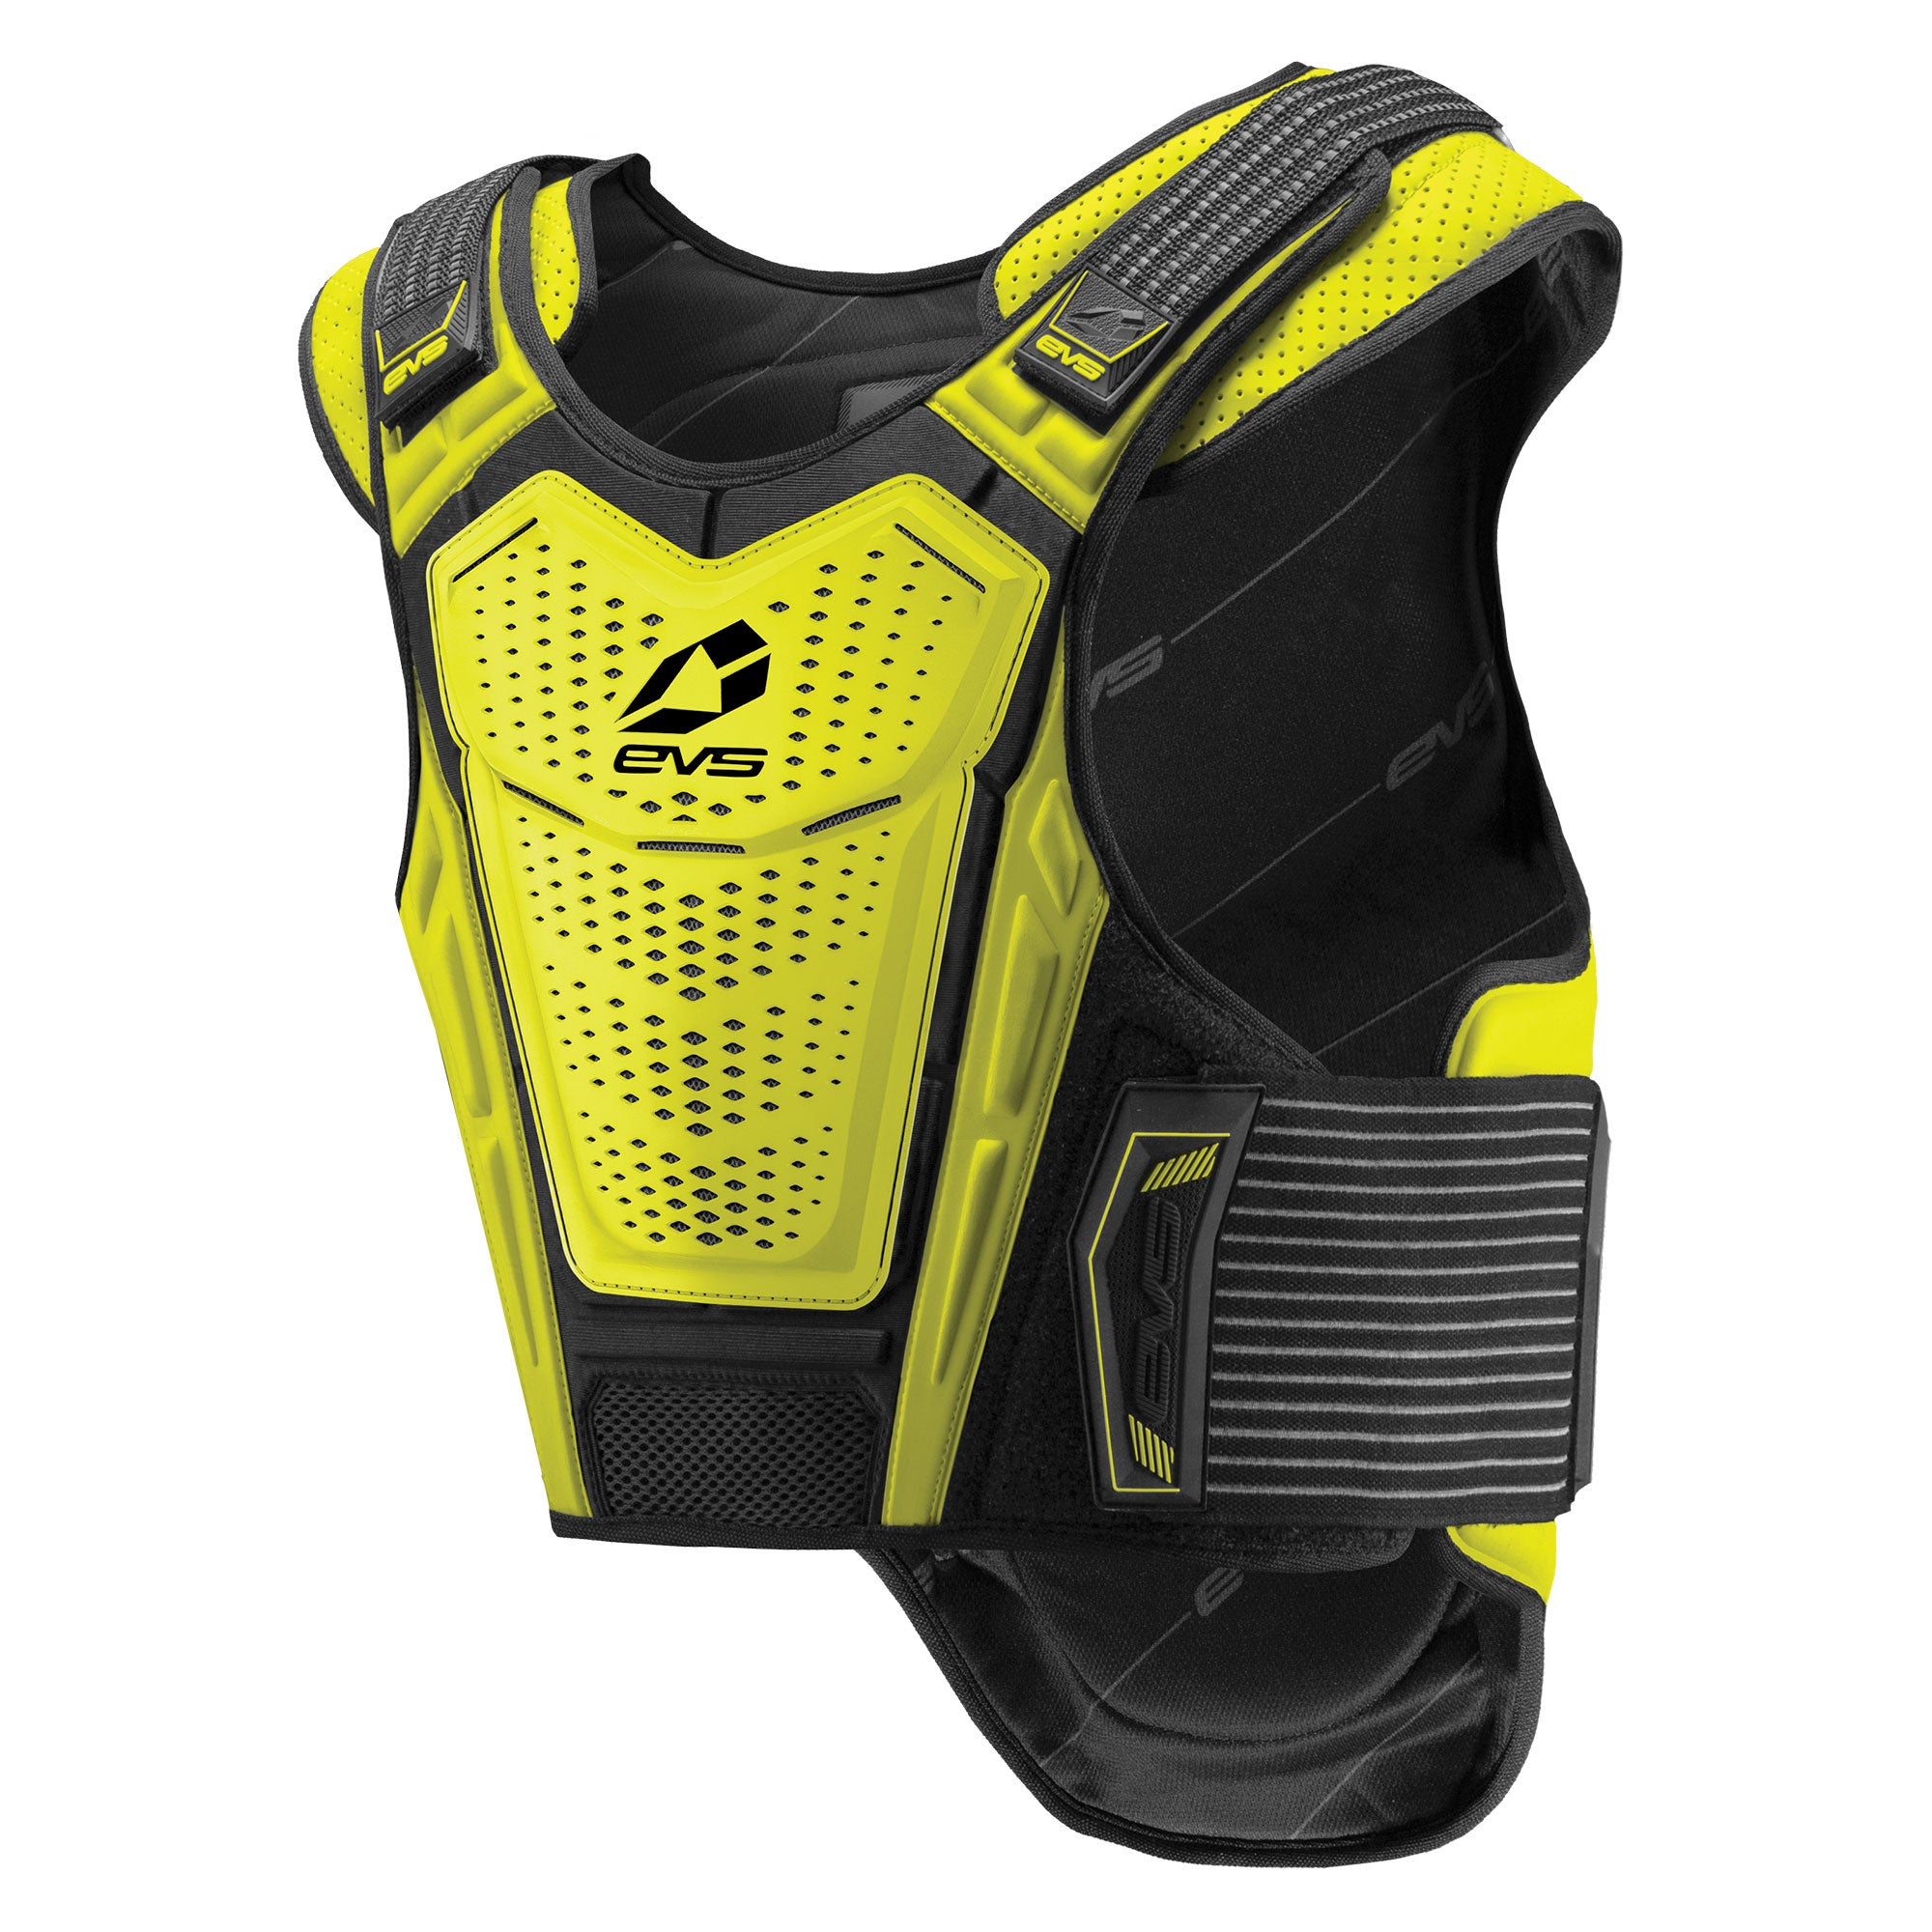 Dordt purchases high-tech vests, Sports